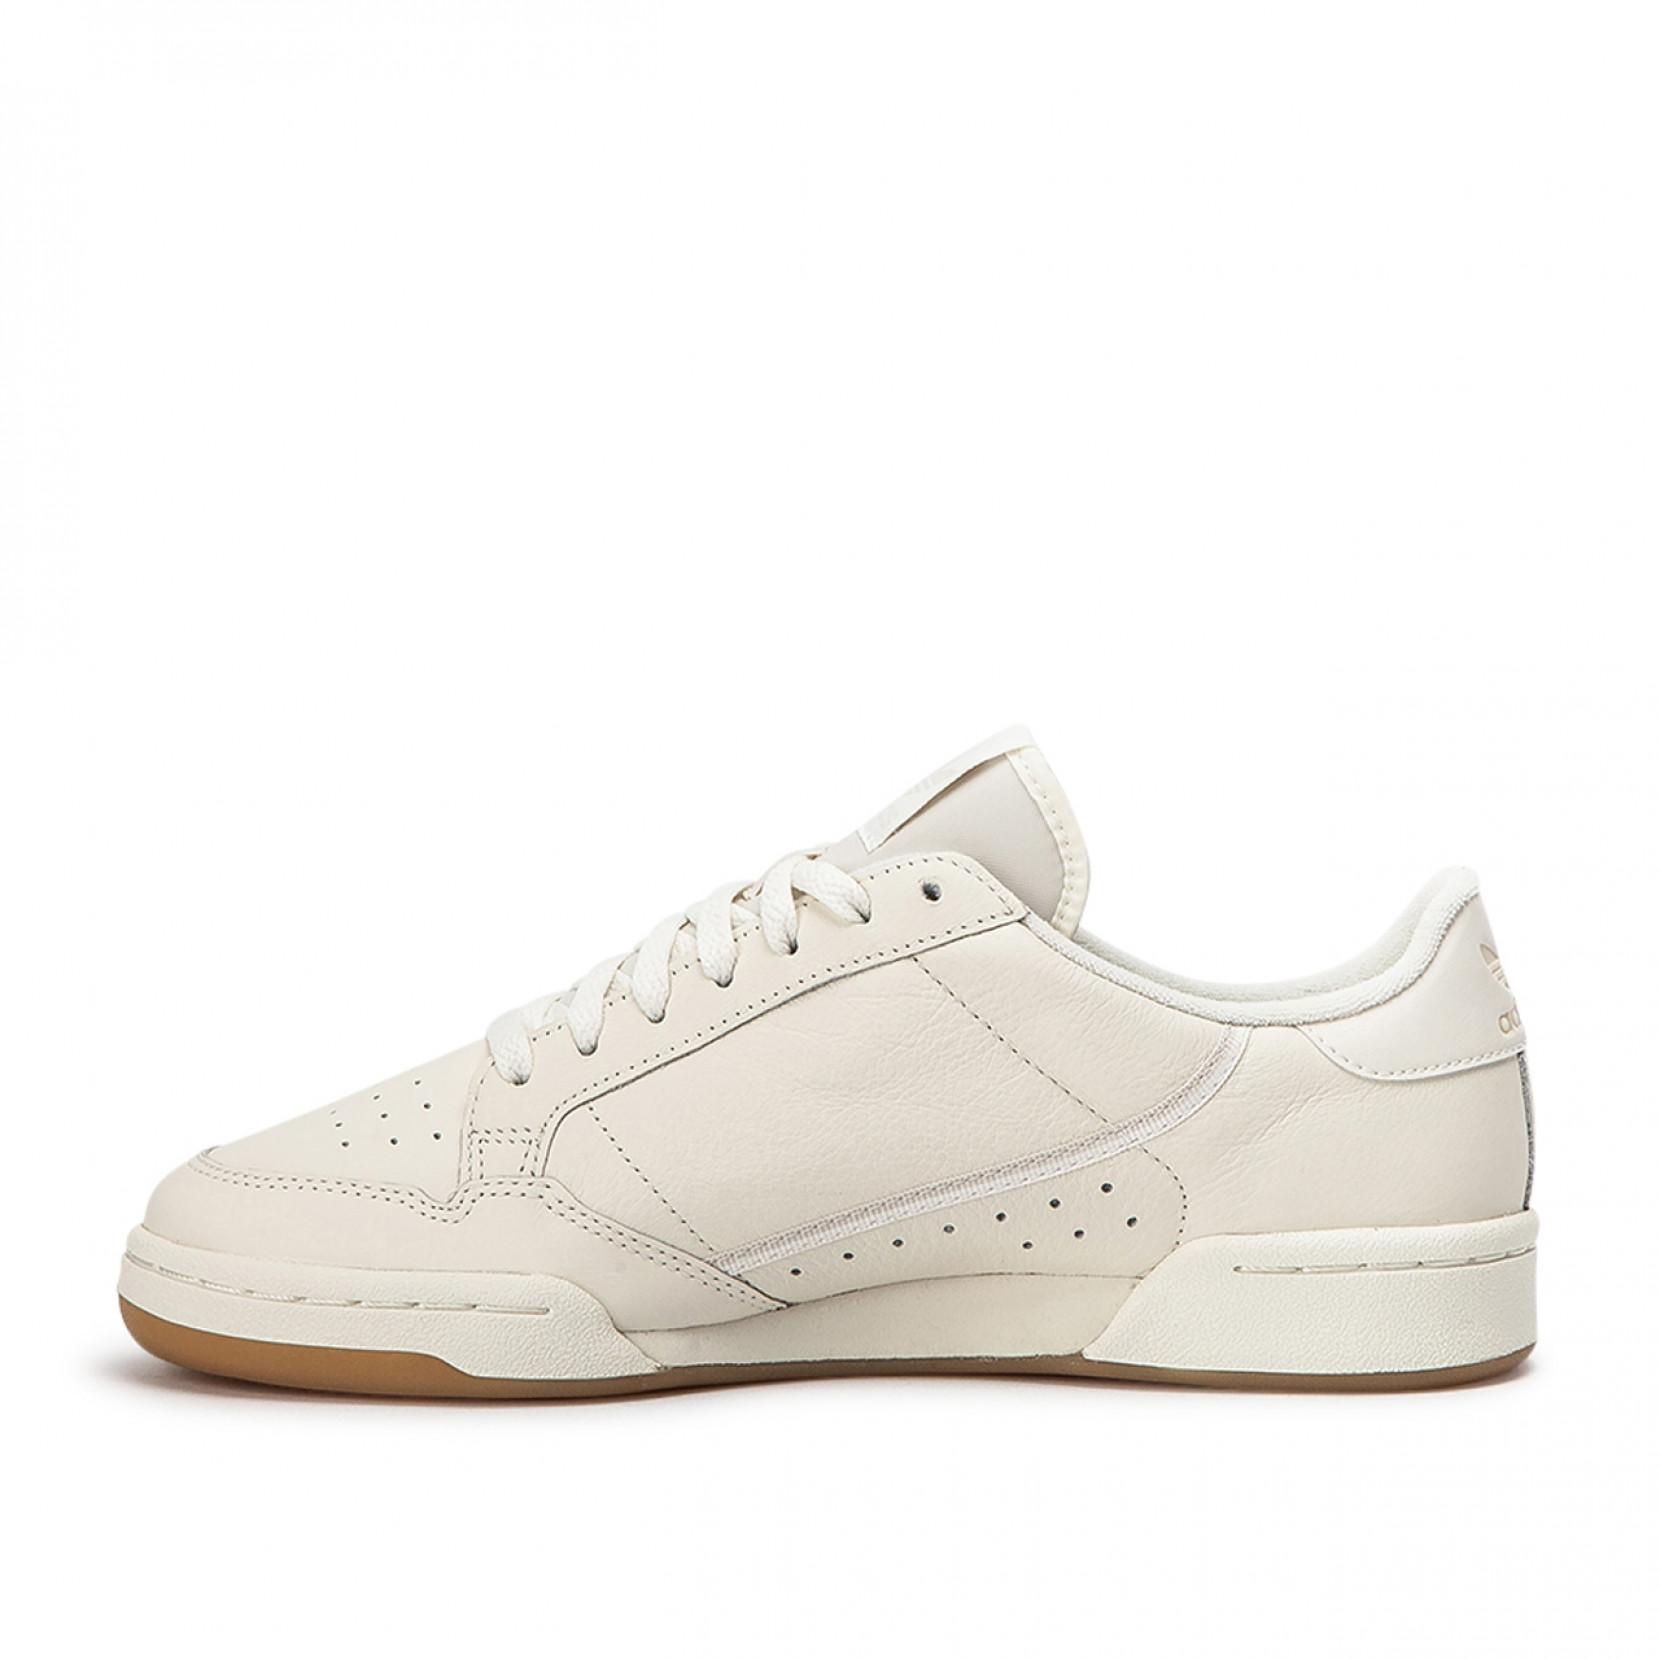 adidas Leather Continental 80 in Beige (Natural) for Men - Lyst